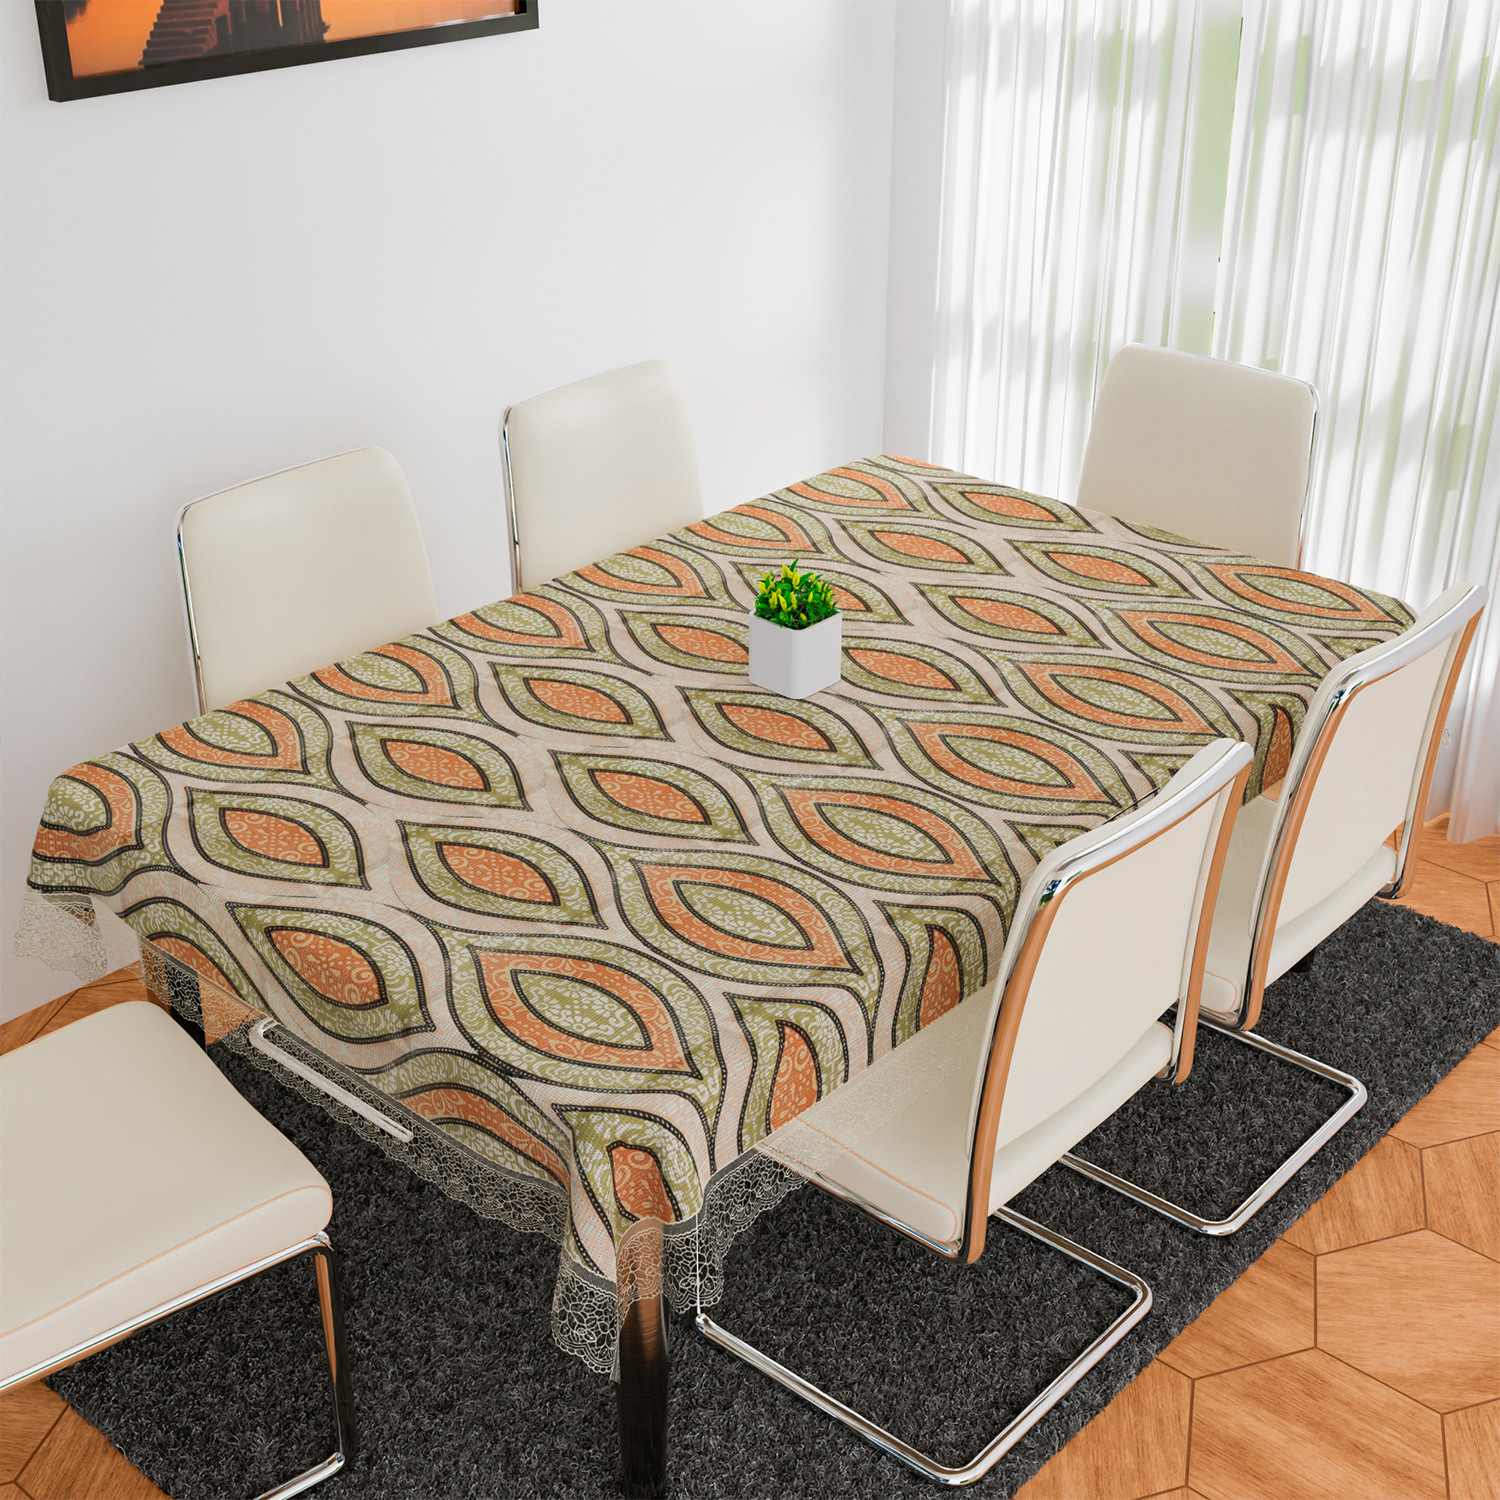 Kuber Industries Dining Table Cover | PVC Table Cloth Cover | 6 Seater Table Cloth | Zig Zag Gripper Table Cover | Table Protector | Table Cover for Dining Table | 60x90 Inch | DTC | Green